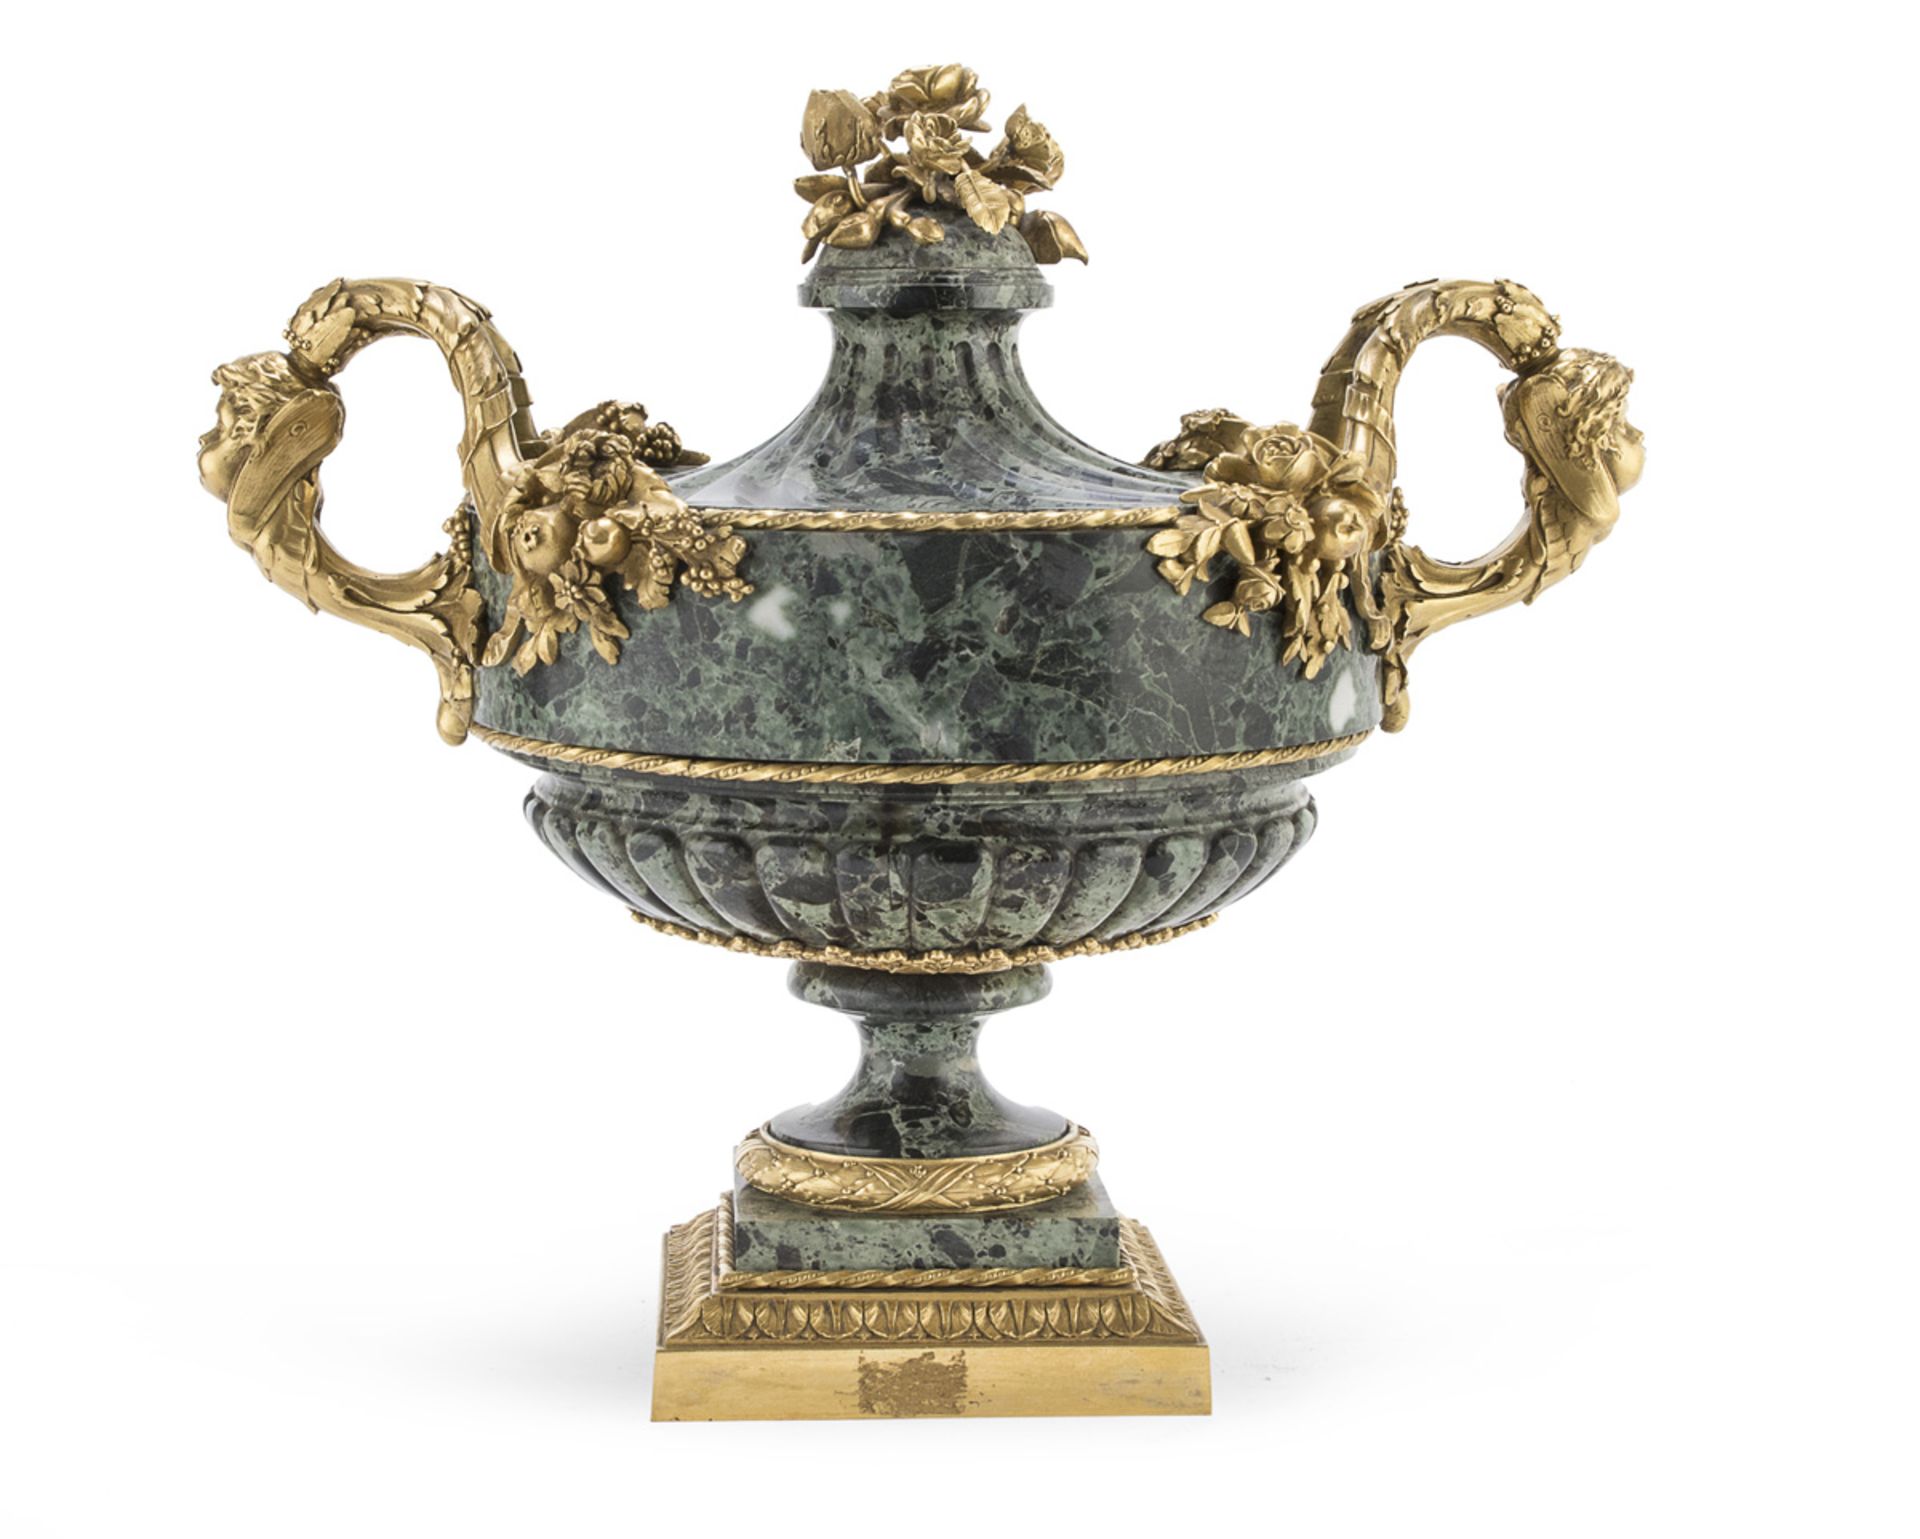 SPLENDID CUP IN GREEN EGYPTIAN GRANITE - FIRST HALF OF THE 19TH CENTURY